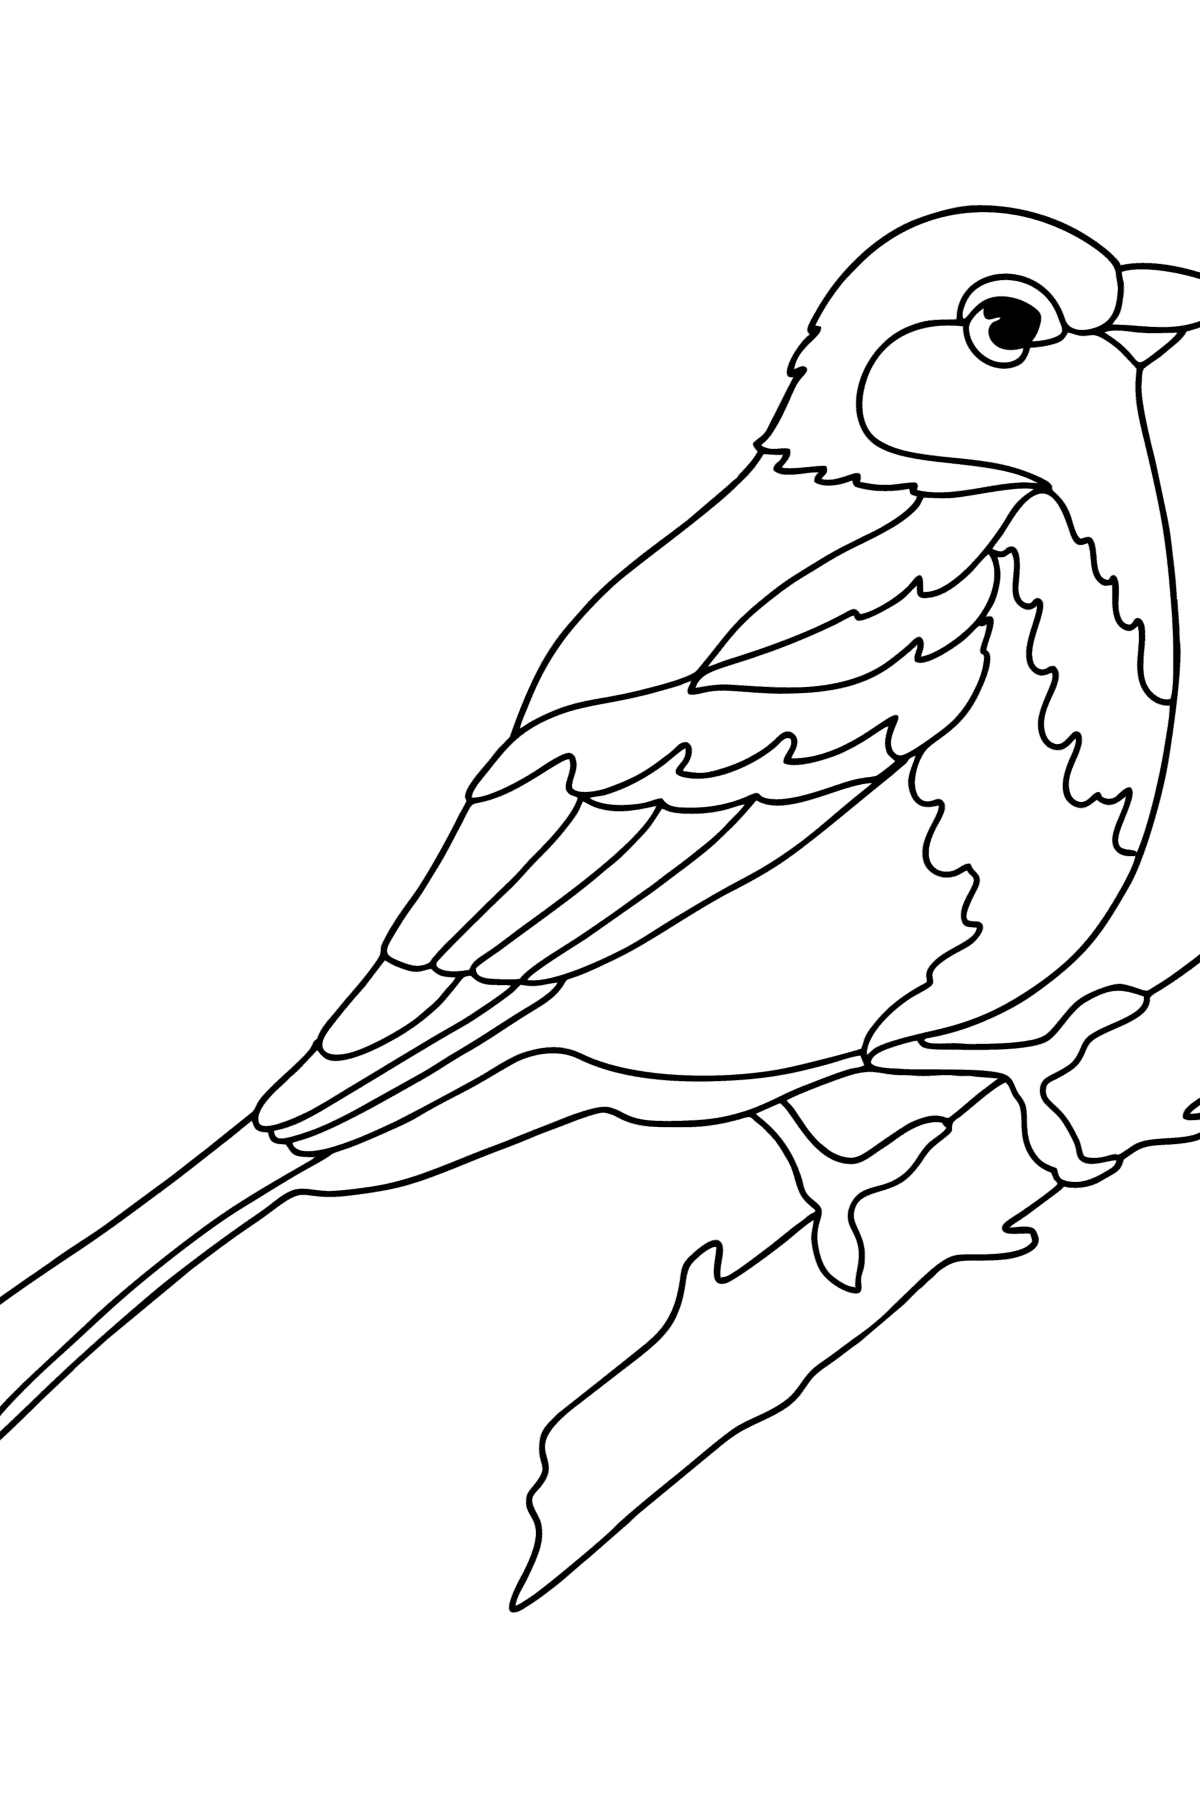 Bird robin сoloring page - Coloring Pages for Kids